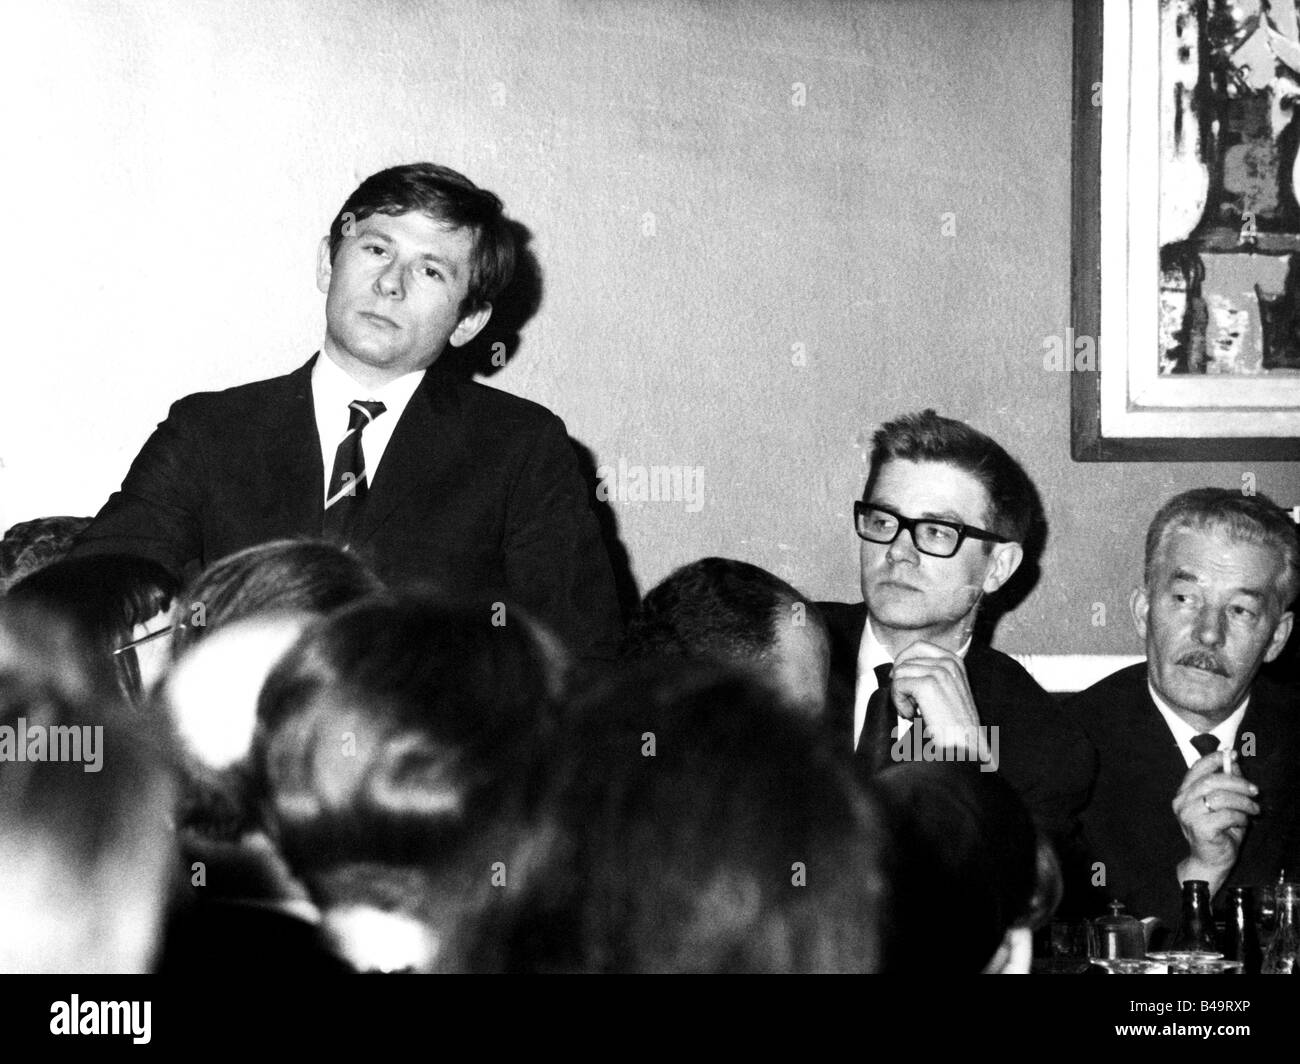 Polanski, Roman, * 18.8.1933, french director and actor, with Wolfgang Gielow, at event, 'Dekadenz bei Gielow', discussion, discotheque P1, Munich, 24.2.1964, Stock Photo